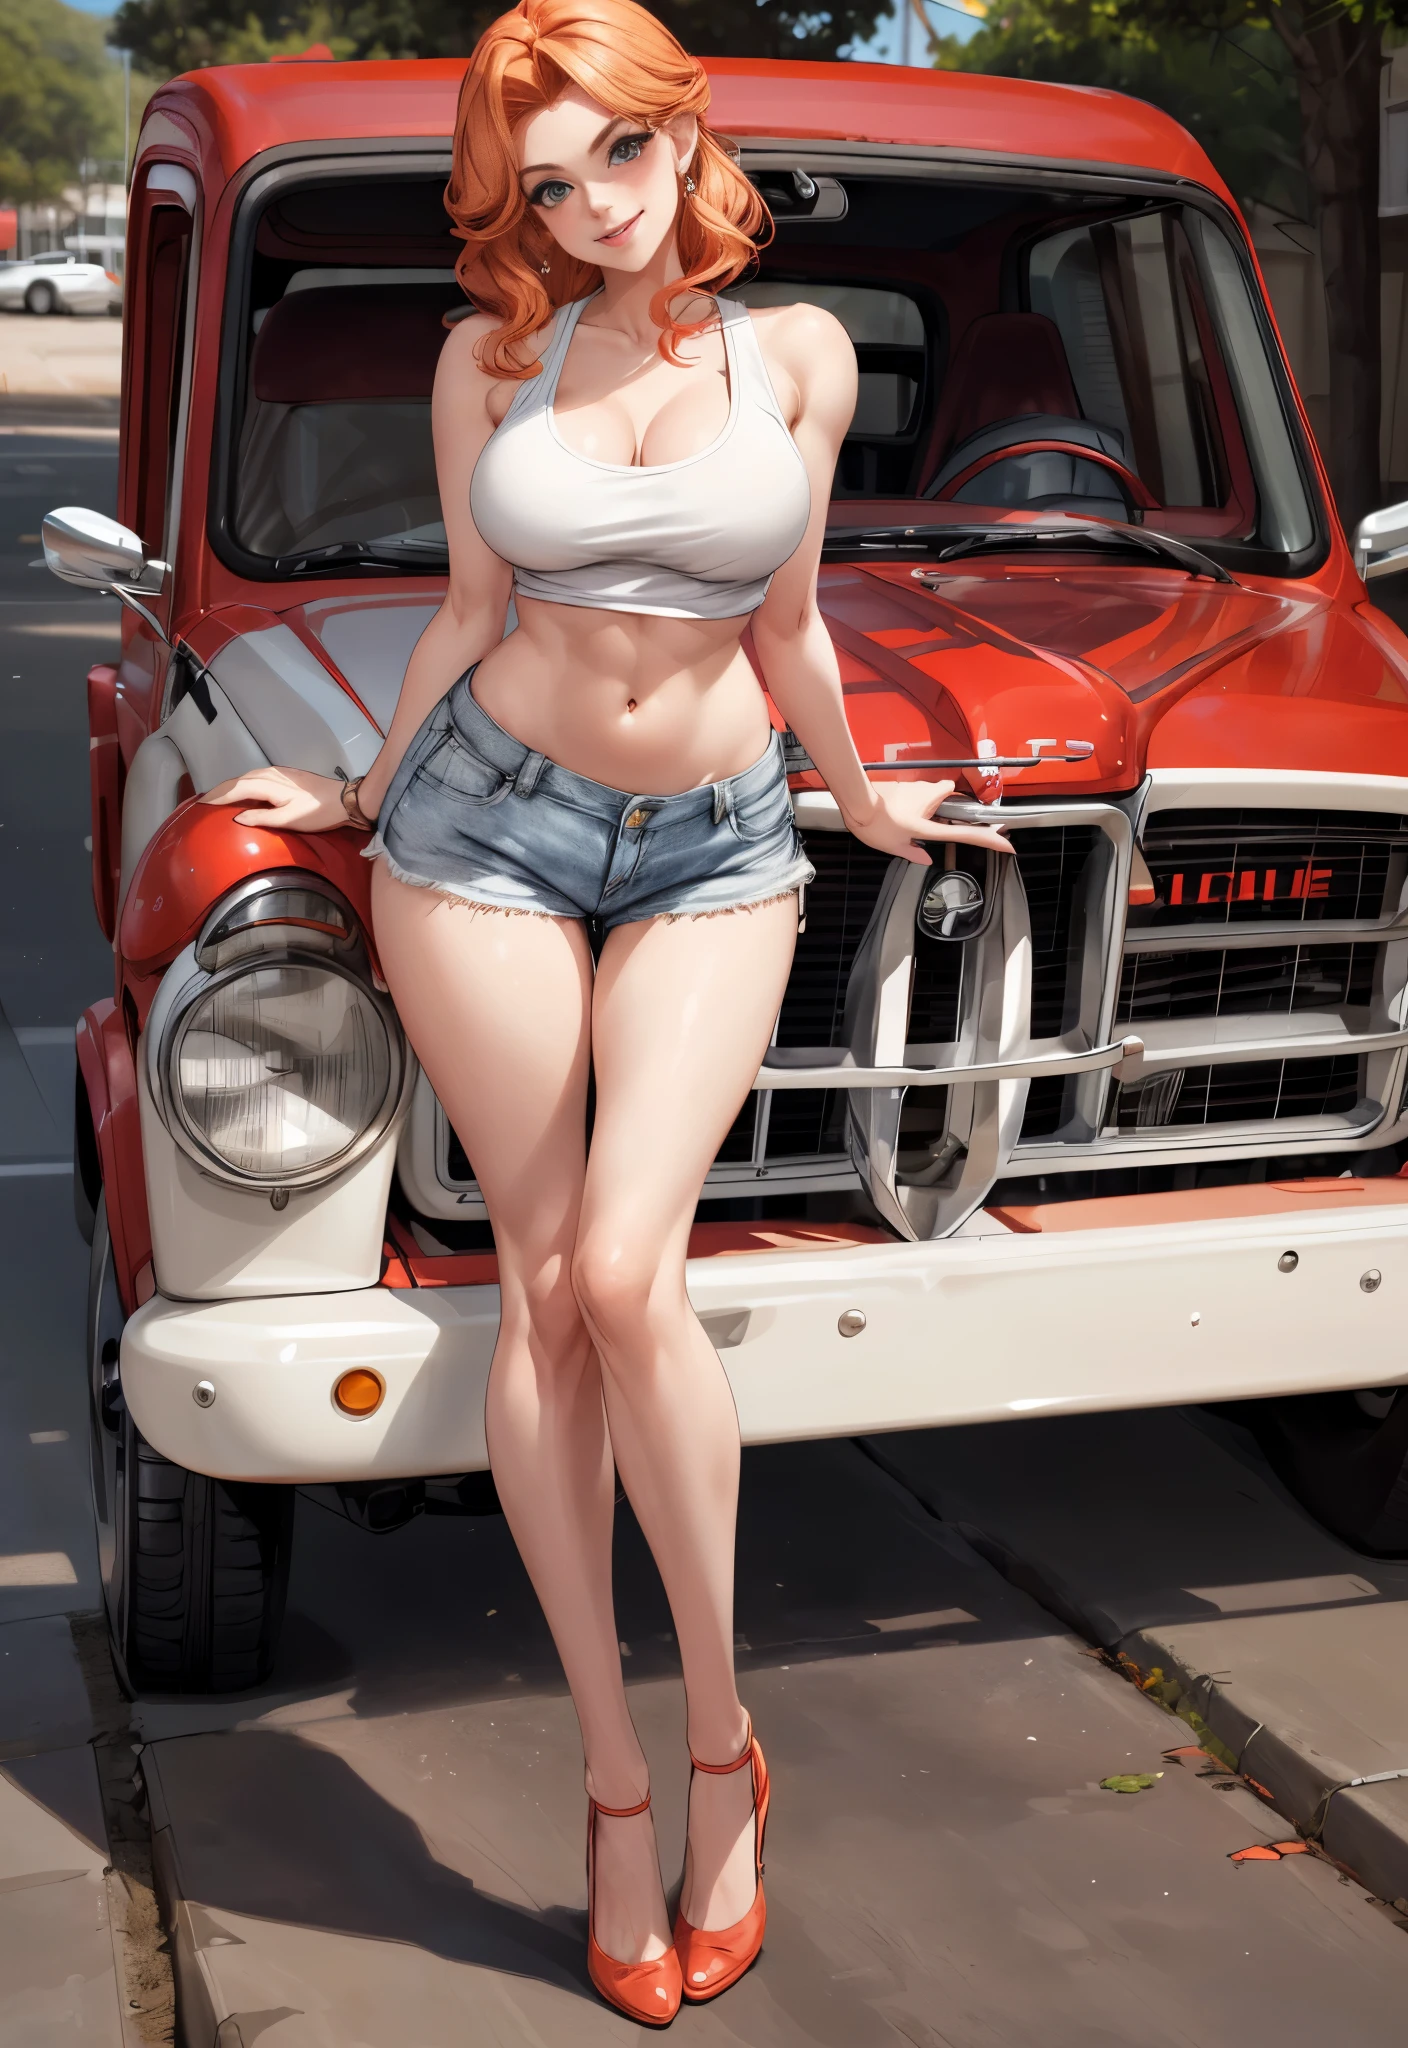 Woman in shorts and tank top standing next to a red truck, Daisy Duques, amouranth, blonde goddess, sexy girl with shorts, pinup body, Pinup Model, better known as amouranth, in front of a garage, Alexa Grace, joven hermosa amouranth, sexy girl, Perfect form, perfect body, looking hot